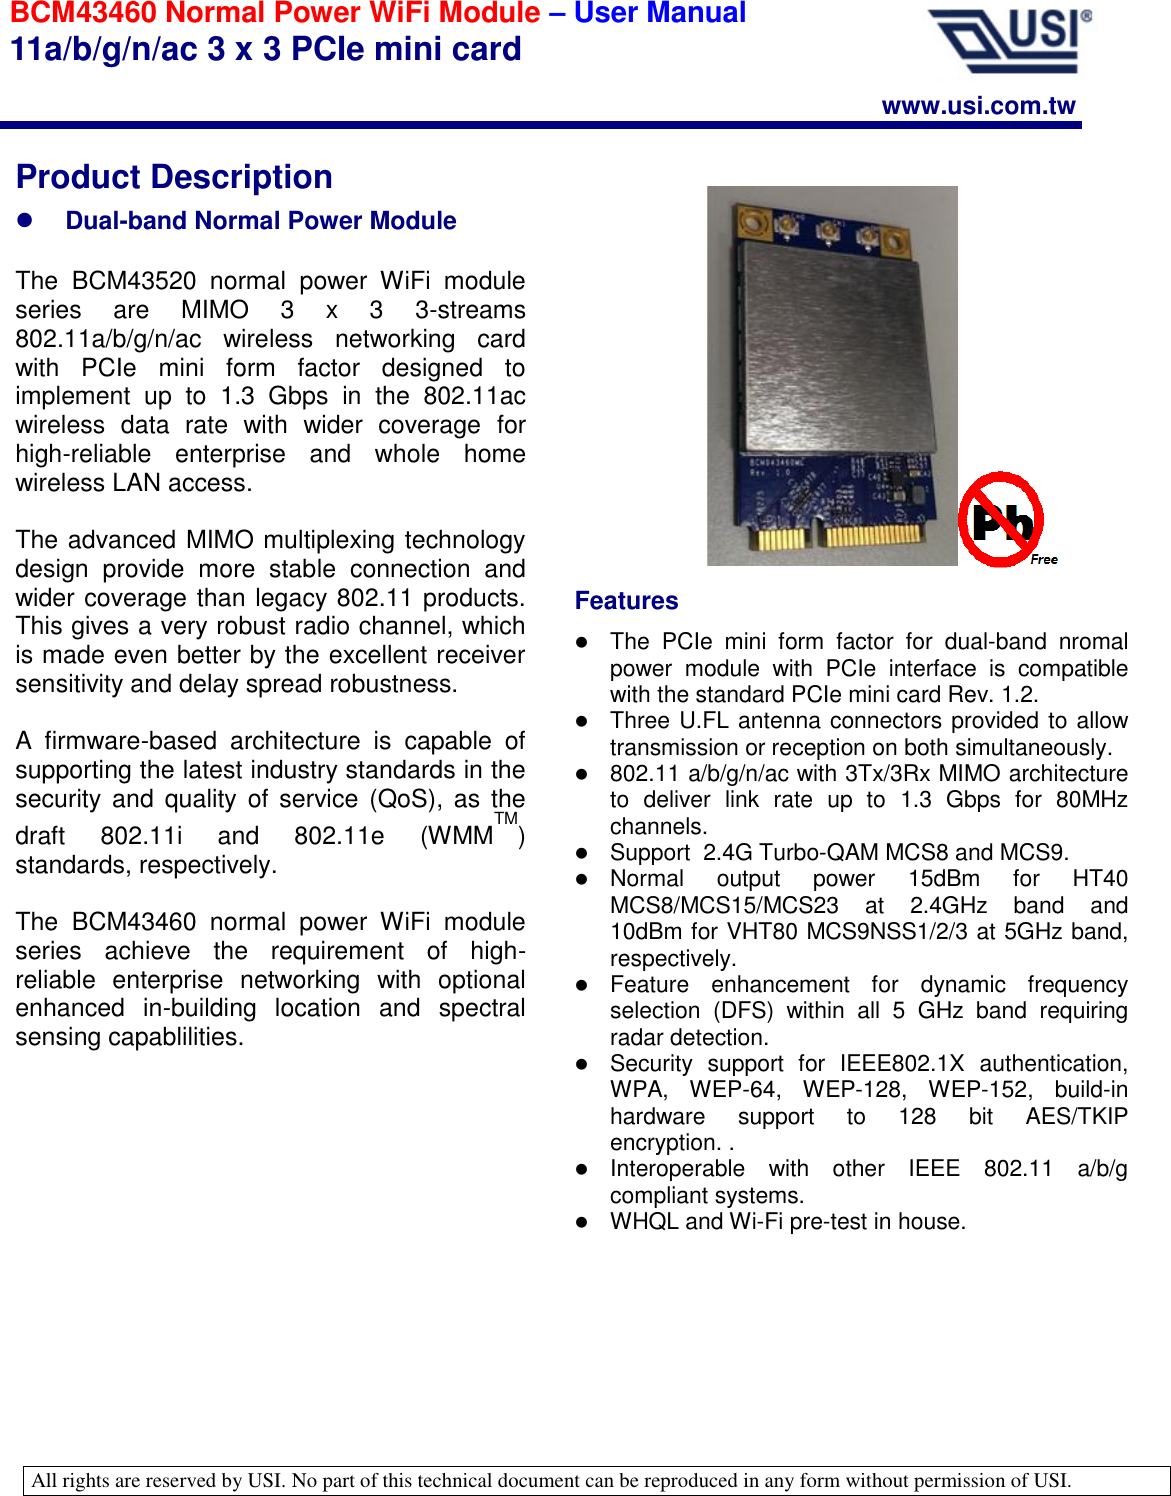   All rights are reserved by USI. No part of this technical document can be reproduced in any form without permission of USI.                                                                                                                                                                                                                                                                               BCM43460 Normal Power WiFi Module – User Manual 11a/b/g/n/ac 3 x 3 PCIe mini card www.usi.com.tw Features  The  PCIe  mini  form  factor  for  dual-band  nromal power  module  with  PCIe  interface  is  compatible with the standard PCIe mini card Rev. 1.2.  Three U.FL antenna connectors provided to allow transmission or reception on both simultaneously.  802.11 a/b/g/n/ac with 3Tx/3Rx MIMO architecture to  deliver  link  rate  up  to  1.3  Gbps  for  80MHz channels.  Support  2.4G Turbo-QAM MCS8 and MCS9.  Normal  output  power  15dBm  for  HT40 MCS8/MCS15/MCS23  at  2.4GHz  band  and 10dBm for VHT80 MCS9NSS1/2/3 at 5GHz band, respectively.  Feature  enhancement  for  dynamic  frequency selection  (DFS)  within  all  5  GHz  band  requiring radar detection.   Security  support  for  IEEE802.1X  authentication, WPA,  WEP-64,  WEP-128,  WEP-152,  build-in hardware  support  to  128  bit  AES/TKIP encryption. .  Interoperable  with  other  IEEE  802.11  a/b/g compliant systems.  WHQL and Wi-Fi pre-test in house. Product Description  Dual-band Normal Power Module  The  BCM43520  normal  power  WiFi  module series  are  MIMO  3  x  3  3-streams 802.11a/b/g/n/ac  wireless  networking  card with  PCIe  mini  form  factor  designed  to implement  up  to  1.3  Gbps  in  the  802.11ac wireless  data  rate  with  wider  coverage  for high-reliable  enterprise  and  whole  home wireless LAN access.   The advanced MIMO multiplexing technology design  provide  more  stable  connection  and wider coverage than legacy 802.11 products. This gives a very robust radio channel, which is made even better by the excellent receiver sensitivity and delay spread robustness.  A  firmware-based  architecture  is  capable  of supporting the latest industry standards in the security and  quality  of  service  (QoS),  as  the draft  802.11i  and  802.11e  (WMMTM) standards, respectively.  The  BCM43460  normal  power  WiFi  module series  achieve  the  requirement  of  high-reliable  enterprise  networking  with  optional enhanced  in-building  location  and  spectral sensing capablilities.   